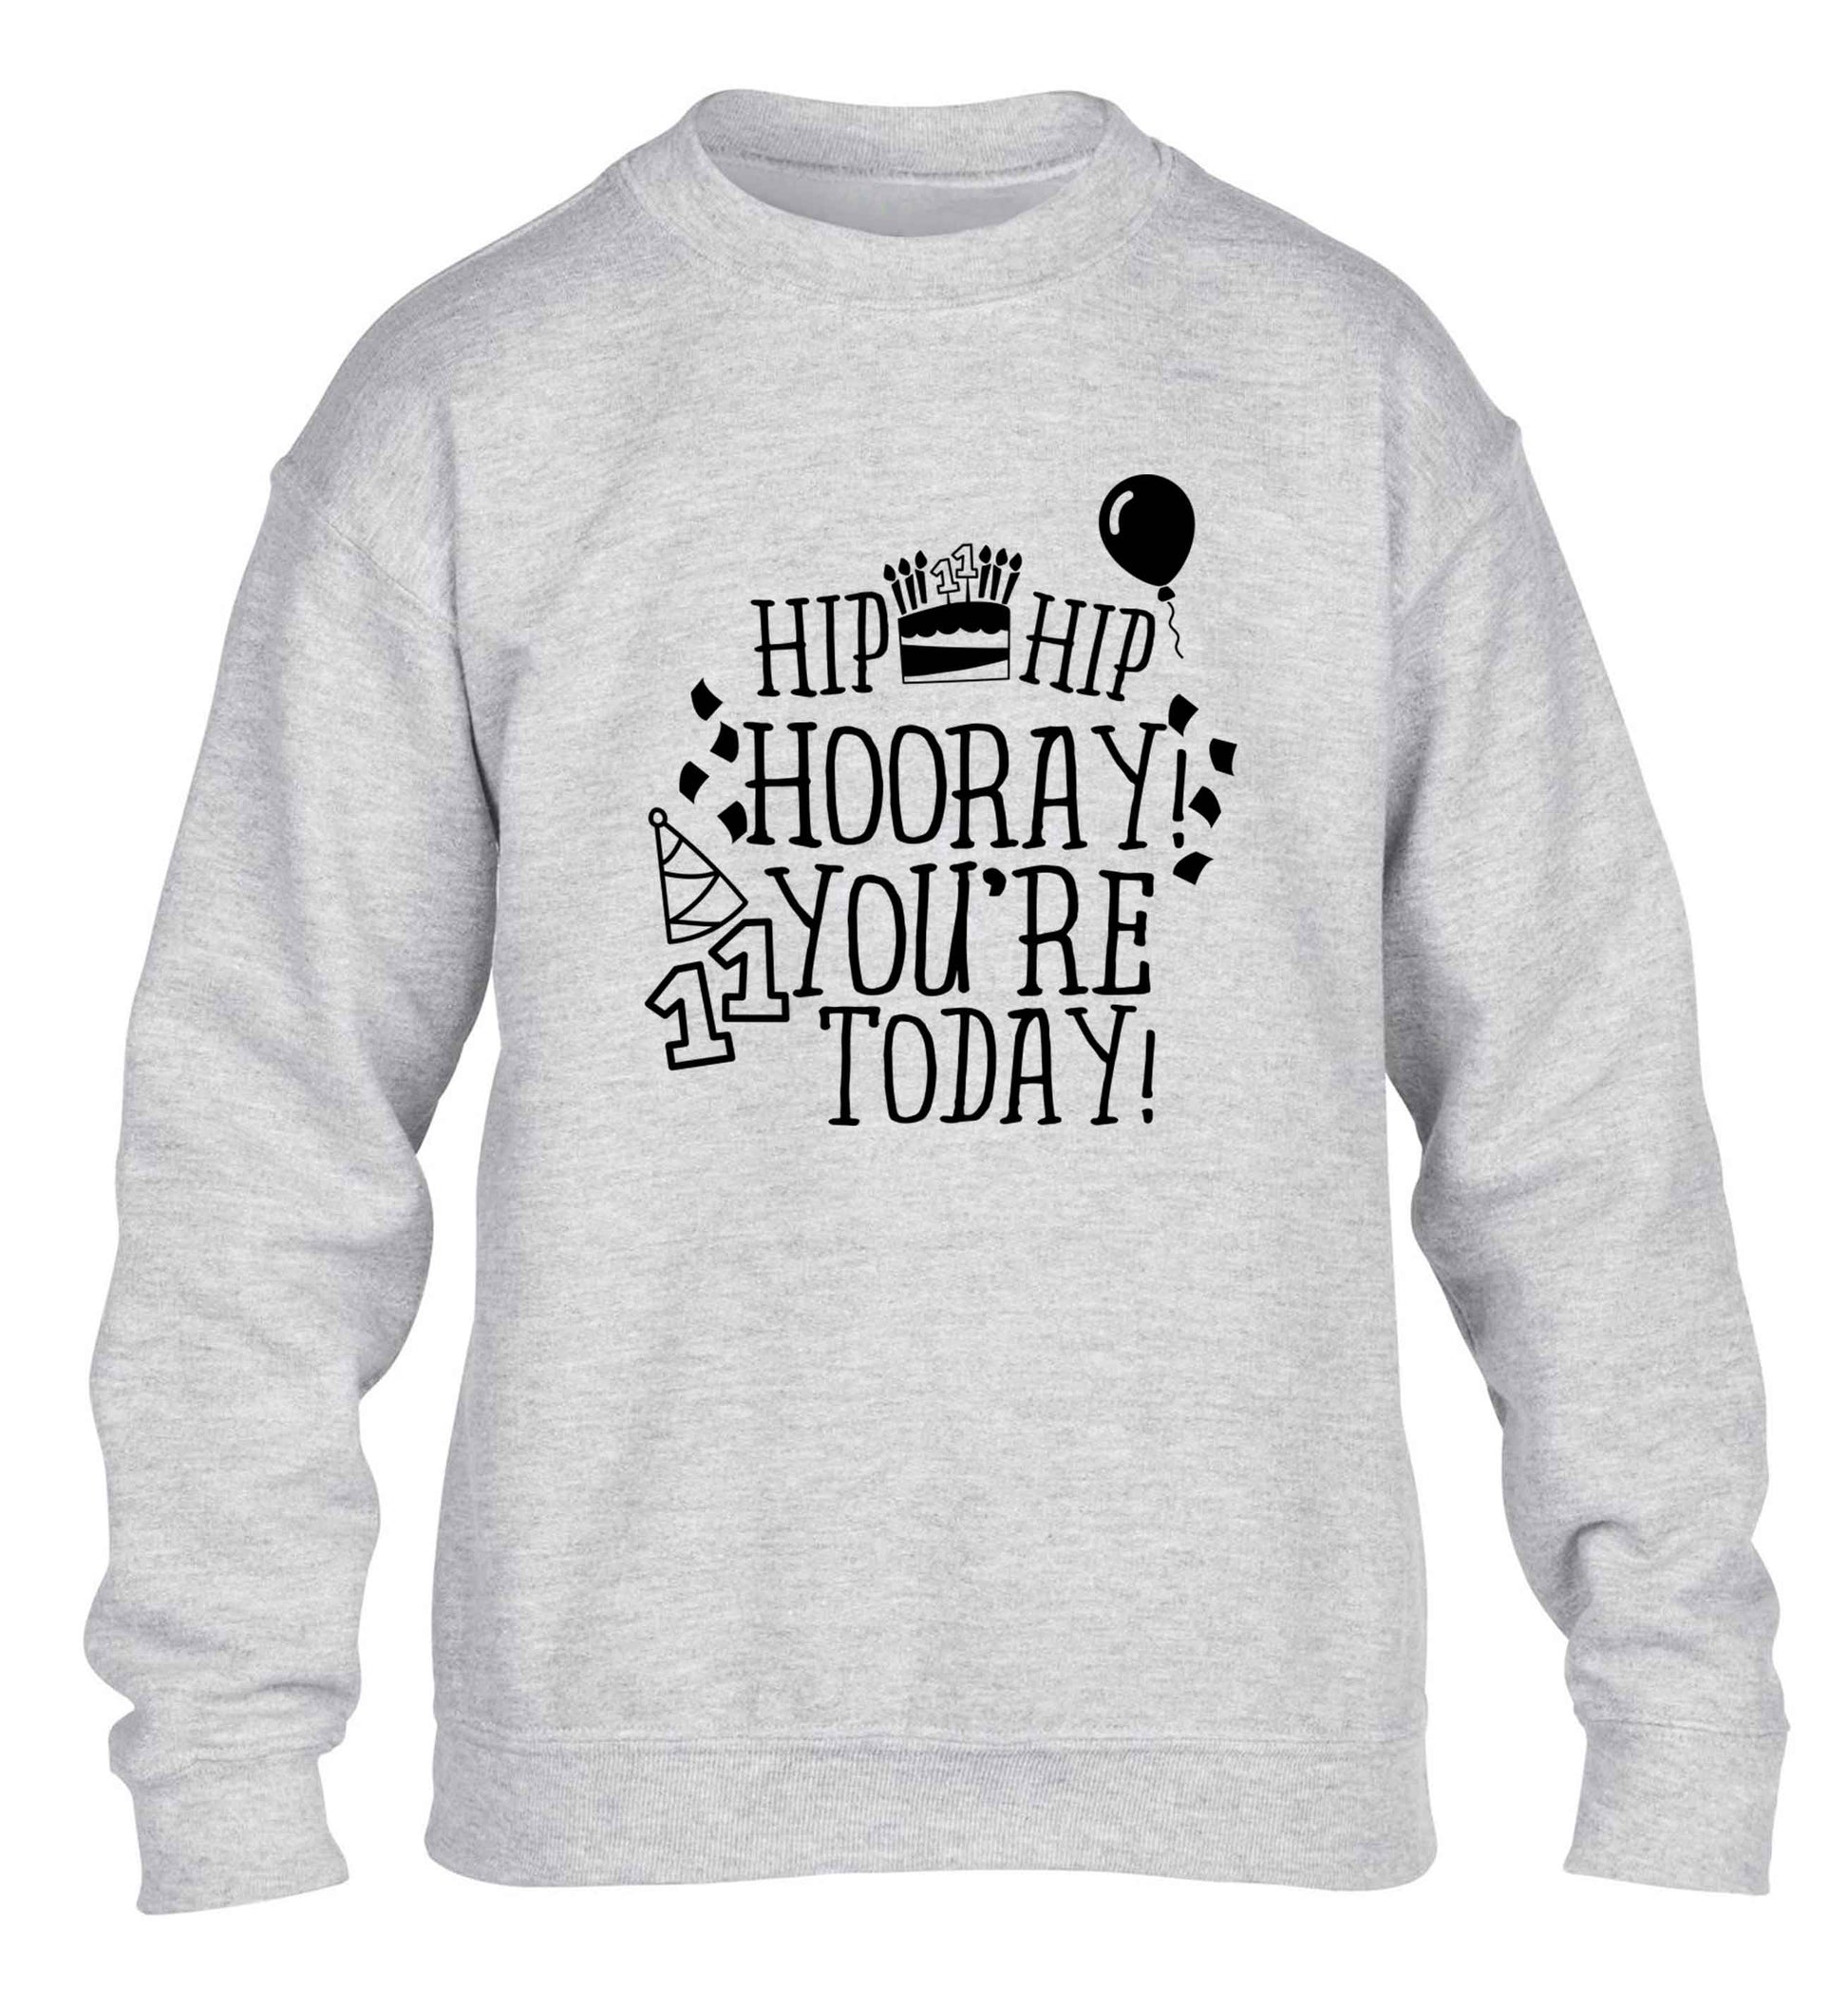 Hip hip hooray I you're eleven today! children's grey sweater 12-13 Years